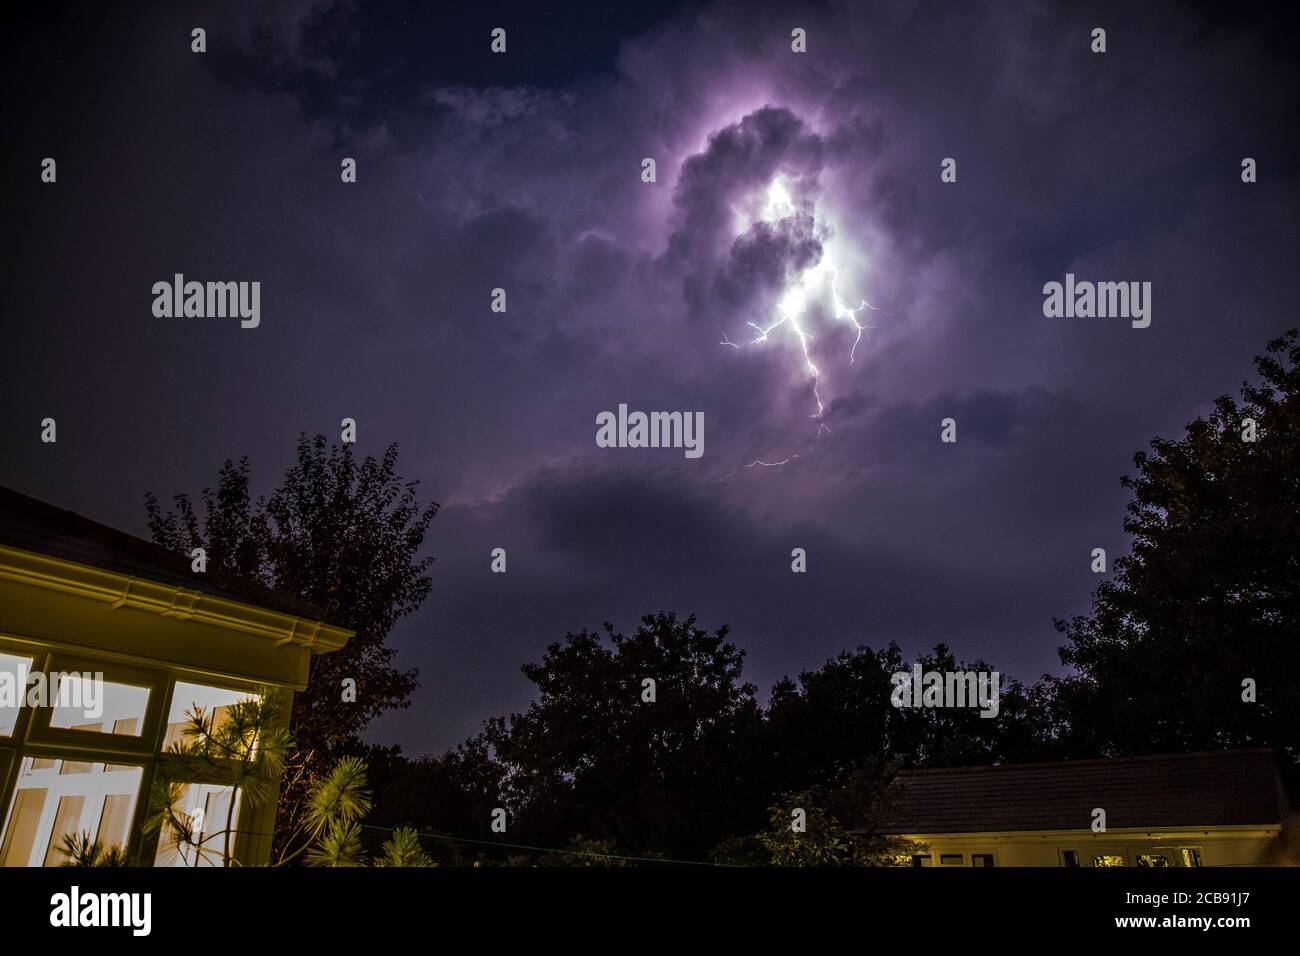 Kidderminster, UK. 11th August, 2020. UK weather: summer lightning strikes dramatically through the clouds above the garden of a residential property in Kidderminster as nighttime thunderstorms hit the county of Worcestershire. Credit: Lee Hudson/Alamy Live News Stock Photo